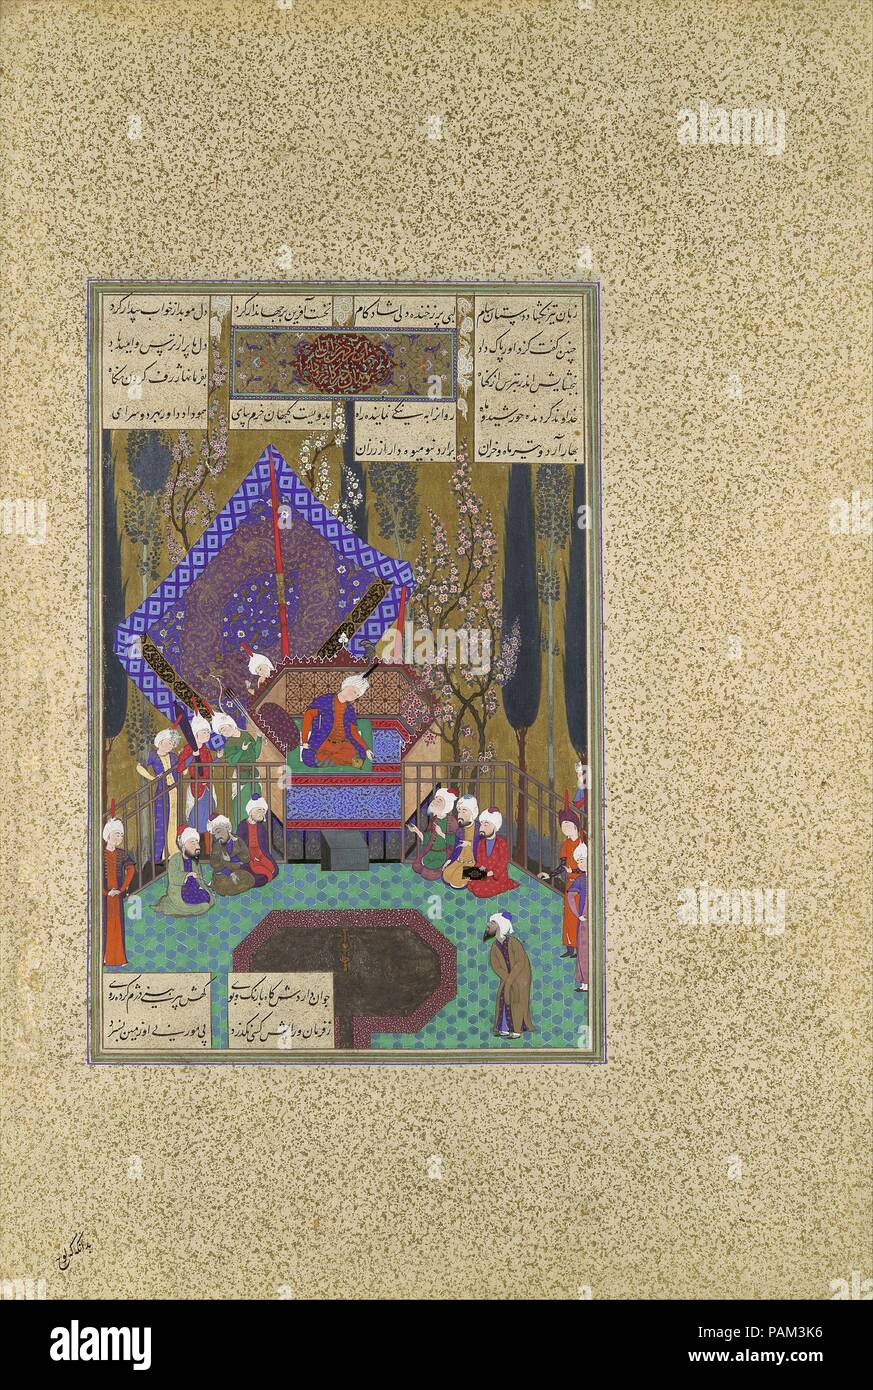 'Zal Consults the Magi', Folio 73v from the Shahnama (Book of Kings) of Shah Tahmasp. Artist: Painting attributed to Sultan Muhammad (active first half 16th century) , assisted by 'Abd al-'Aziz. Author: Abu'l Qasim Firdausi (935-1020). Dimensions: Painting: H. 11 1/16 x W. 7 1/4 in. (H. 28.1 x W. 18.4 cm)  Entire Page: H. 18 9/16 x W. 12 1/2 in. (H. 47.1 x W. 31.8 cm). Workshop director: Sultan Muhammad (active first half 16th century). Date: ca. 1530-35.  In this painting, Zal is depicted enthroned as he consults his magi, or Zoroastrian wise men, on how to win his father's approval to marry  Stock Photo